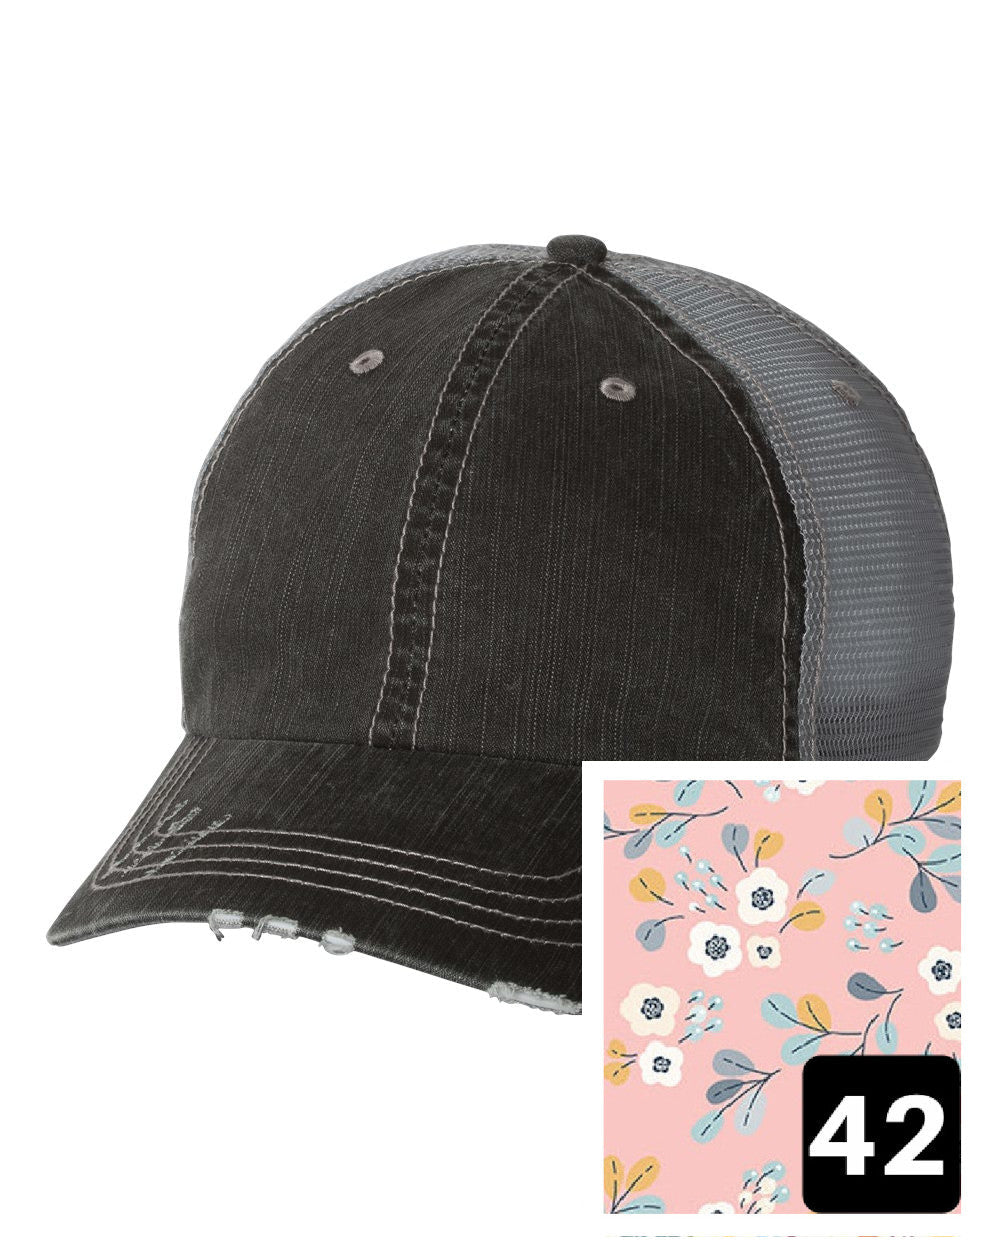 gray distressed trucker hat with light blue and pink mosaic fabric state of Colorado